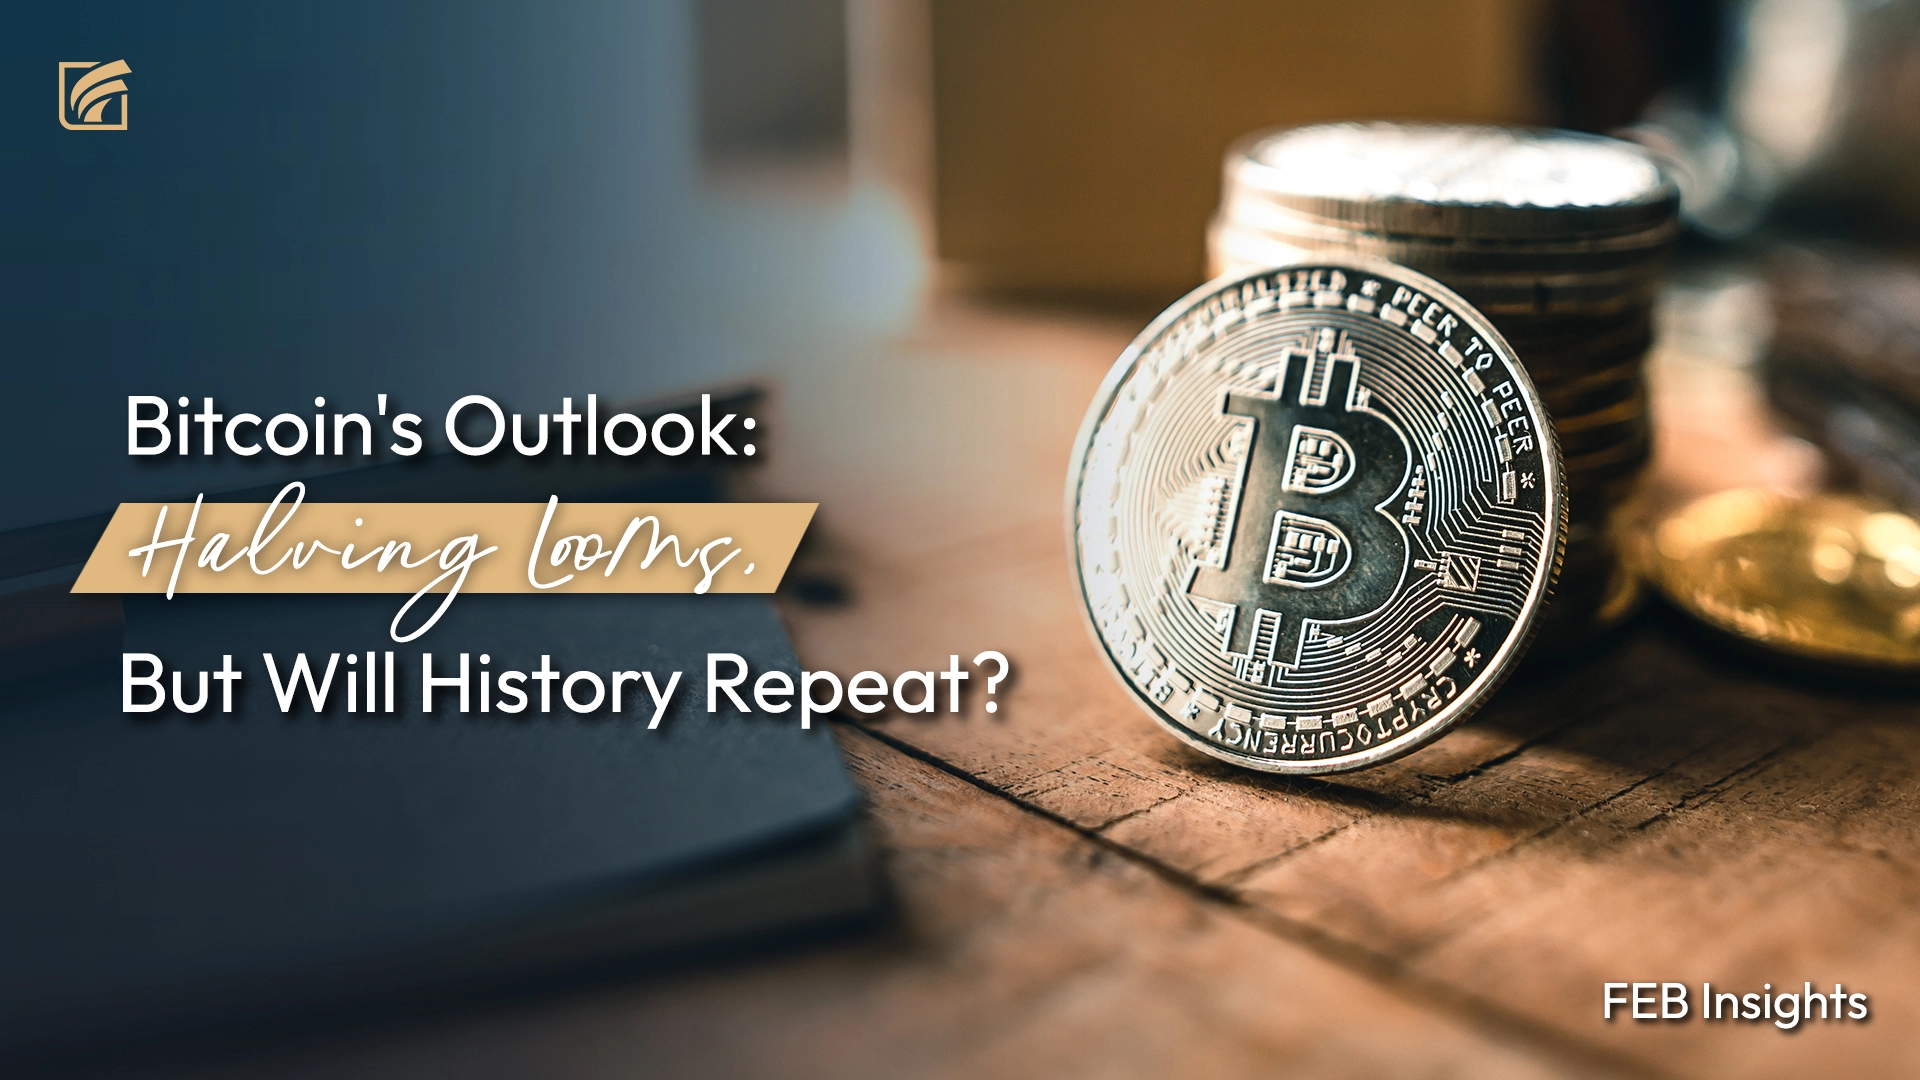 Bitcoin’s Outlook: Halving Looms, But Will History Repeat?